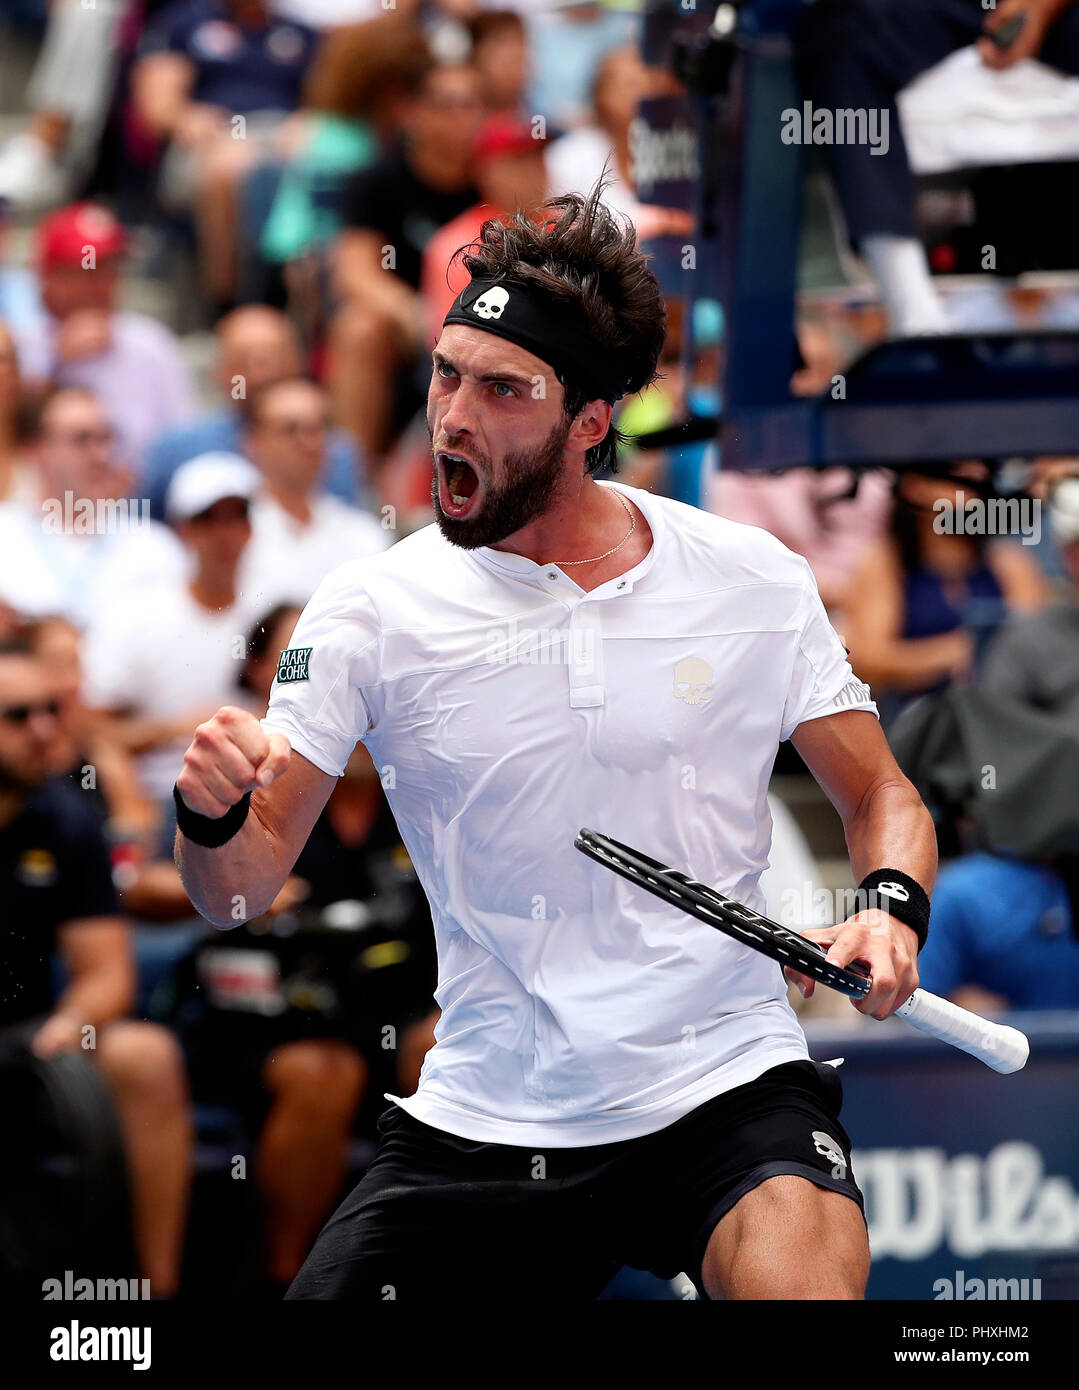 New York, United States. 02nd Sep, 2018. Flushing Meadows, New York - September 2, 2018: US Open Tennis: Nikoloz Basilashvili of the Republic of Georgia celebrates after winning the third set today against Number 1 seed Rafael Nadal during their fourth round match at the US Open in Flushing Meadows, New York. Nadal won in four sets. Credit: Adam Stoltman/Alamy Live News Stock Photo